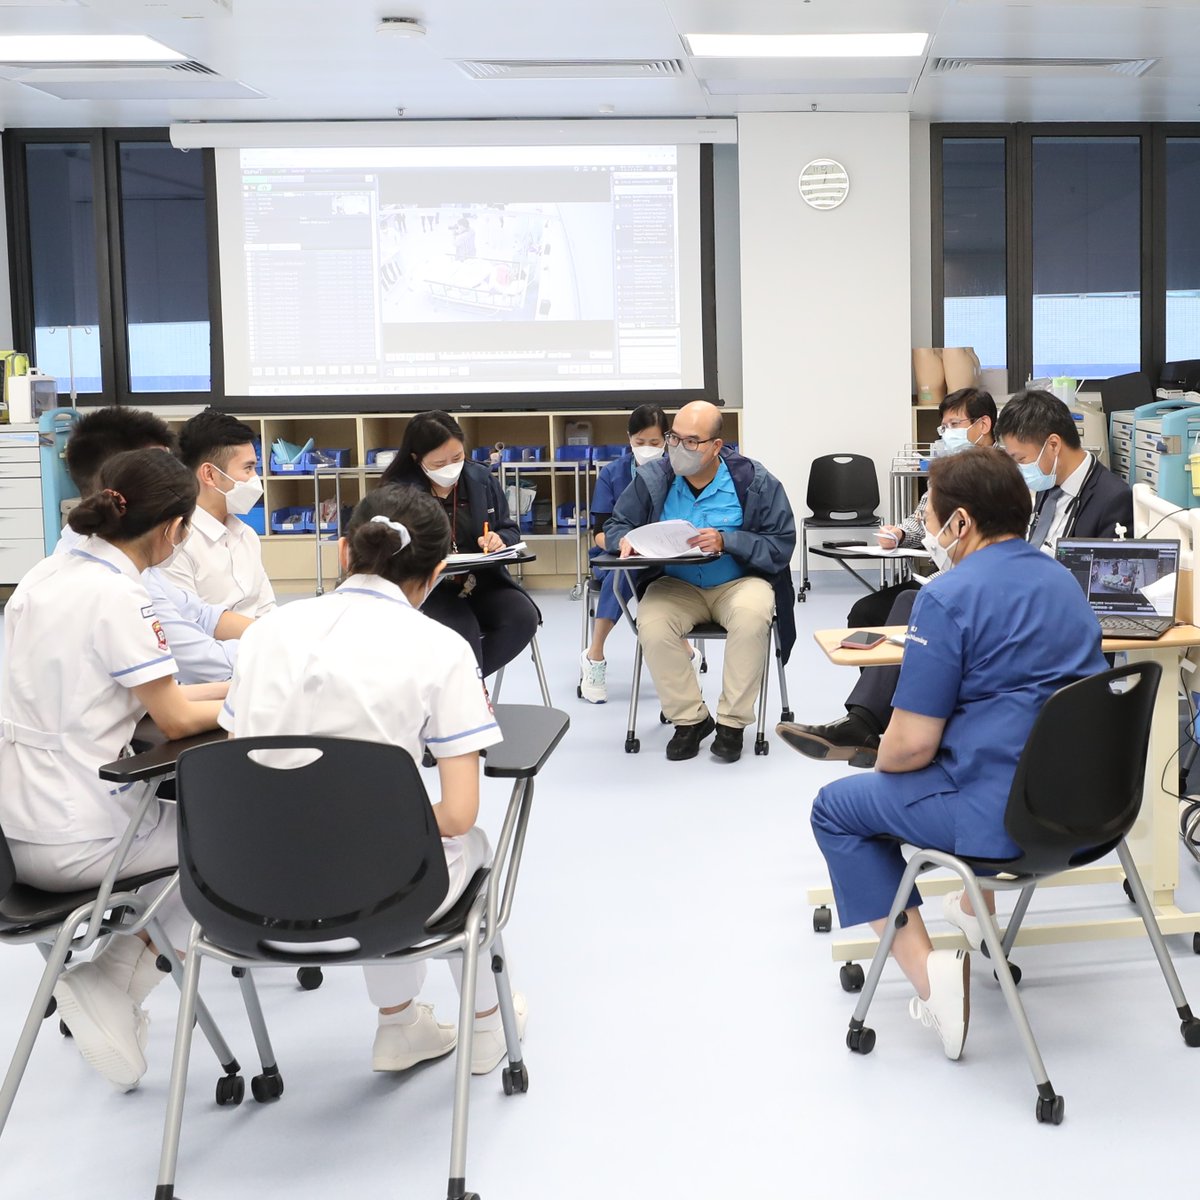 Four #interprofessional teams from @hkumed & @hkuson advanced to the final of the Ares Leung #Clinical Skills Competition. They collaborated to handle #emergencies in the ward mimicking real-life #scenarios. #Debriefing was given for continuous learning. Result announcement soon.